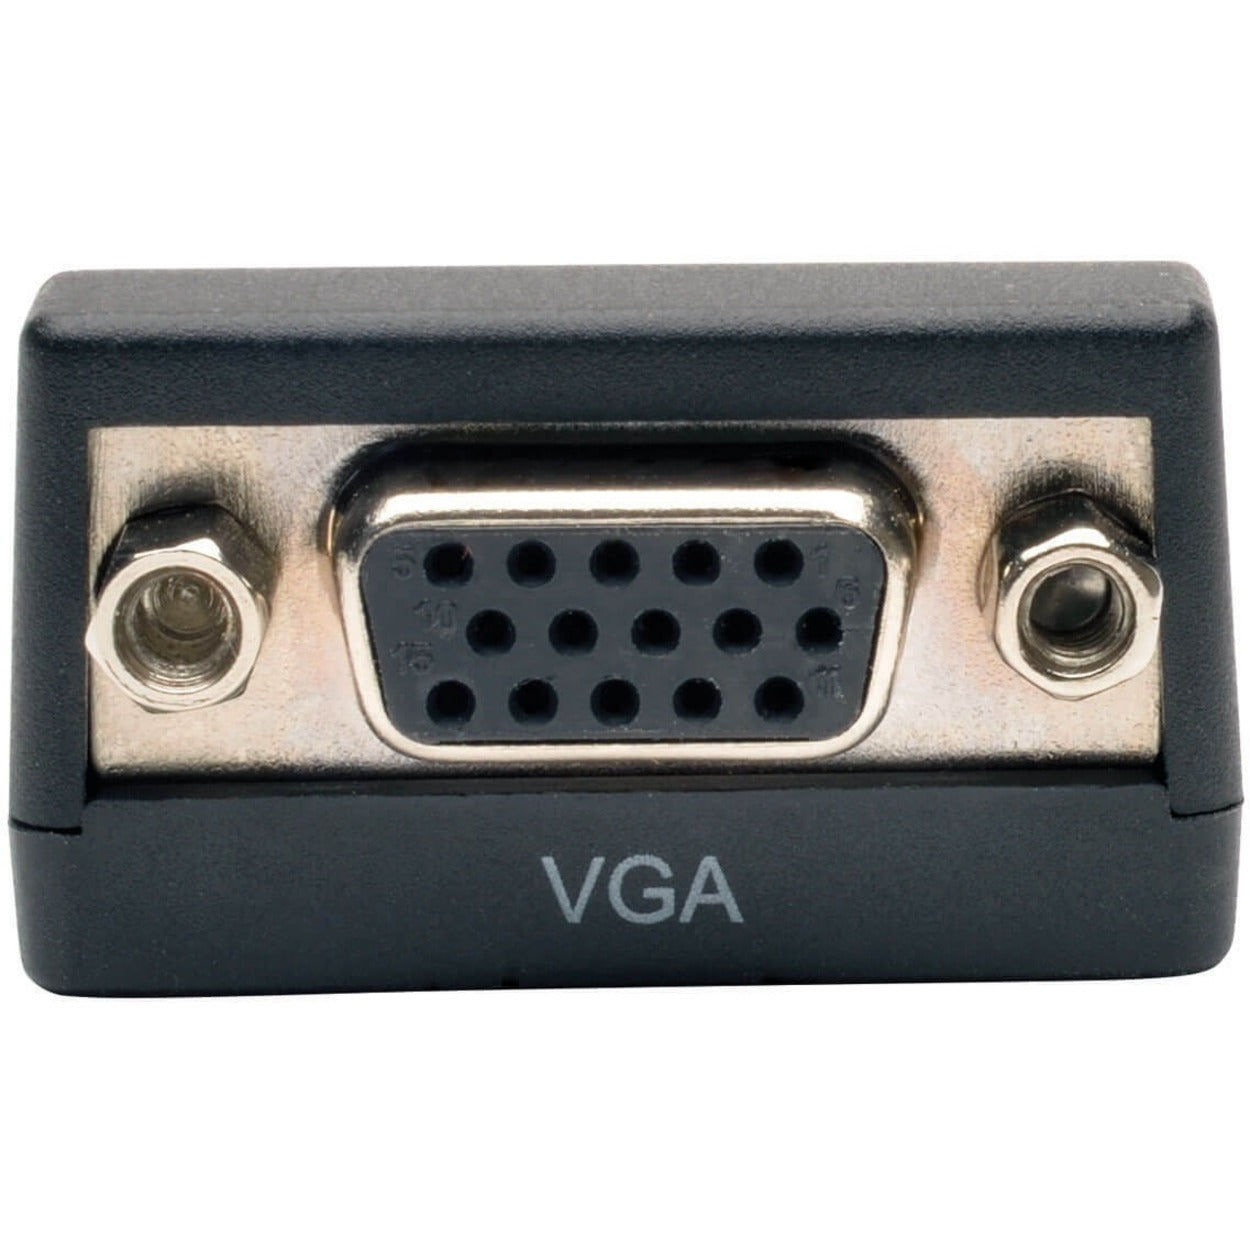 Tripp Lite P134-000-VGA-V2 DisplayPort 1.2 to VGA Compact Adapter Converter (DP-Male to VGA-Female), Molded, 1920 x 1200 Resolution Supported, Black